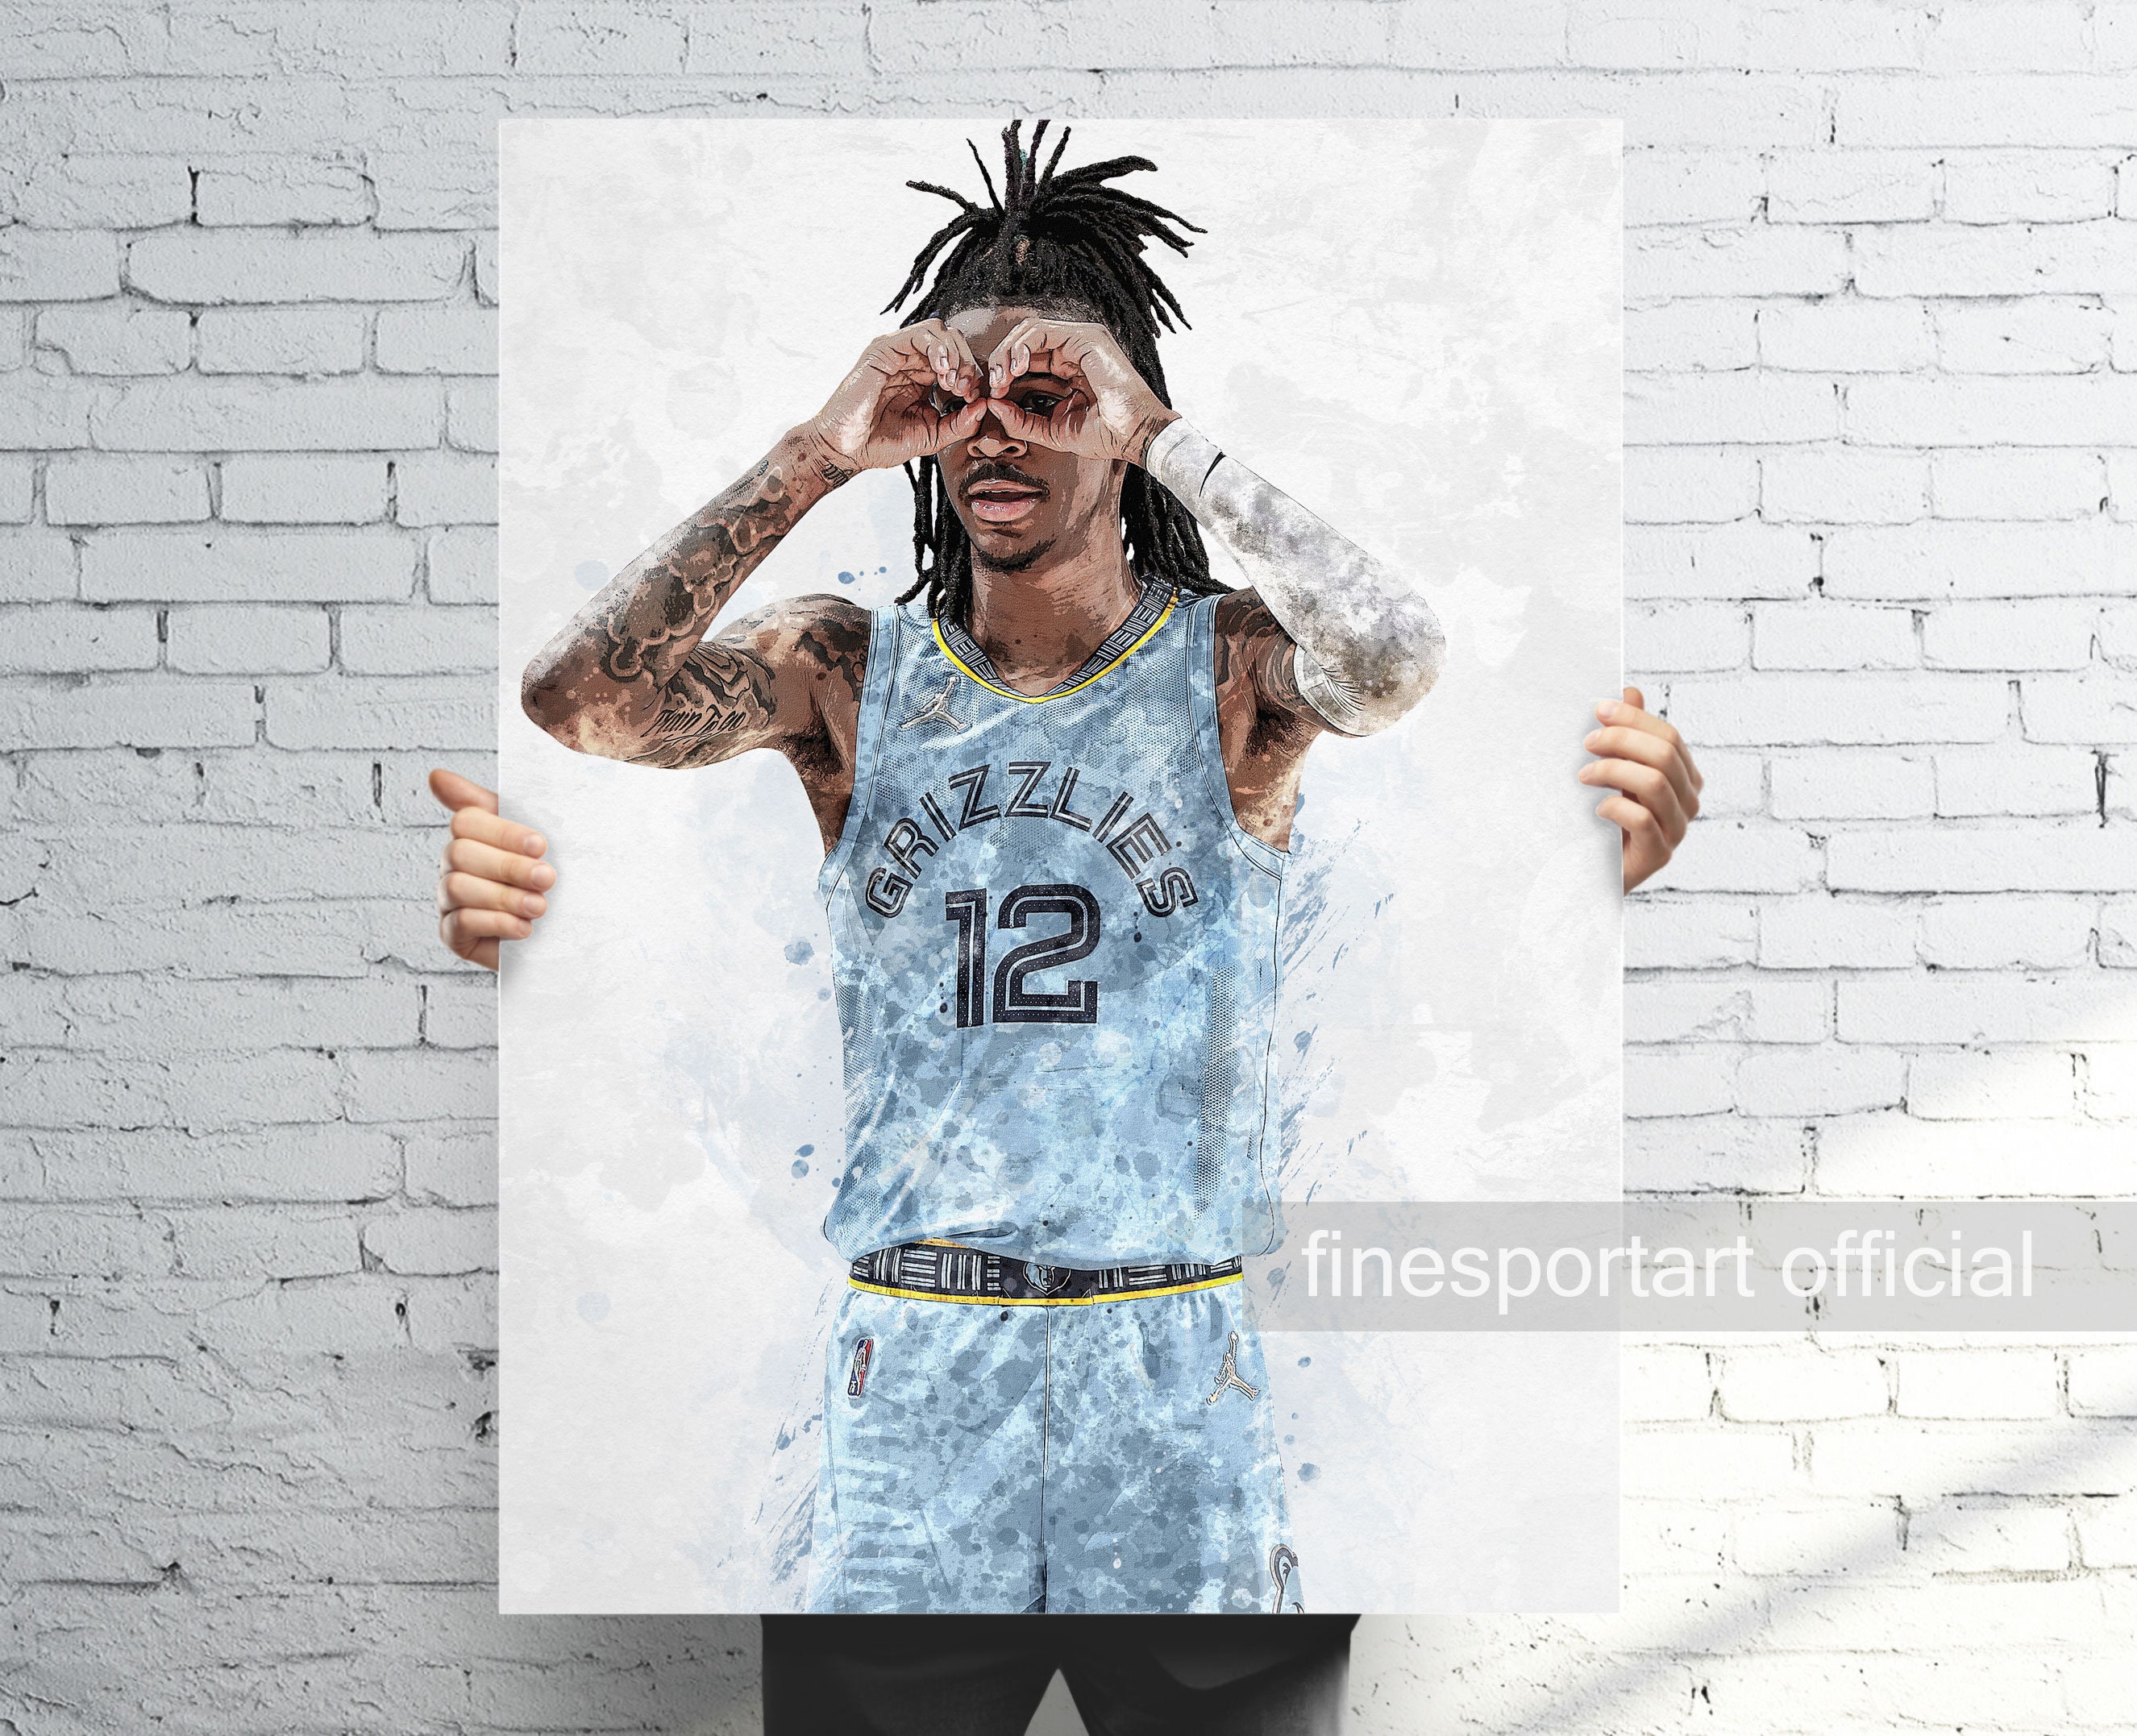 Ja Morant Basketball (2) Poster Decorative Painting Canvas Wall Posters and  Art Picture Print Modern Family Bedroom Decor Posters 12x18inch(30x45cm)